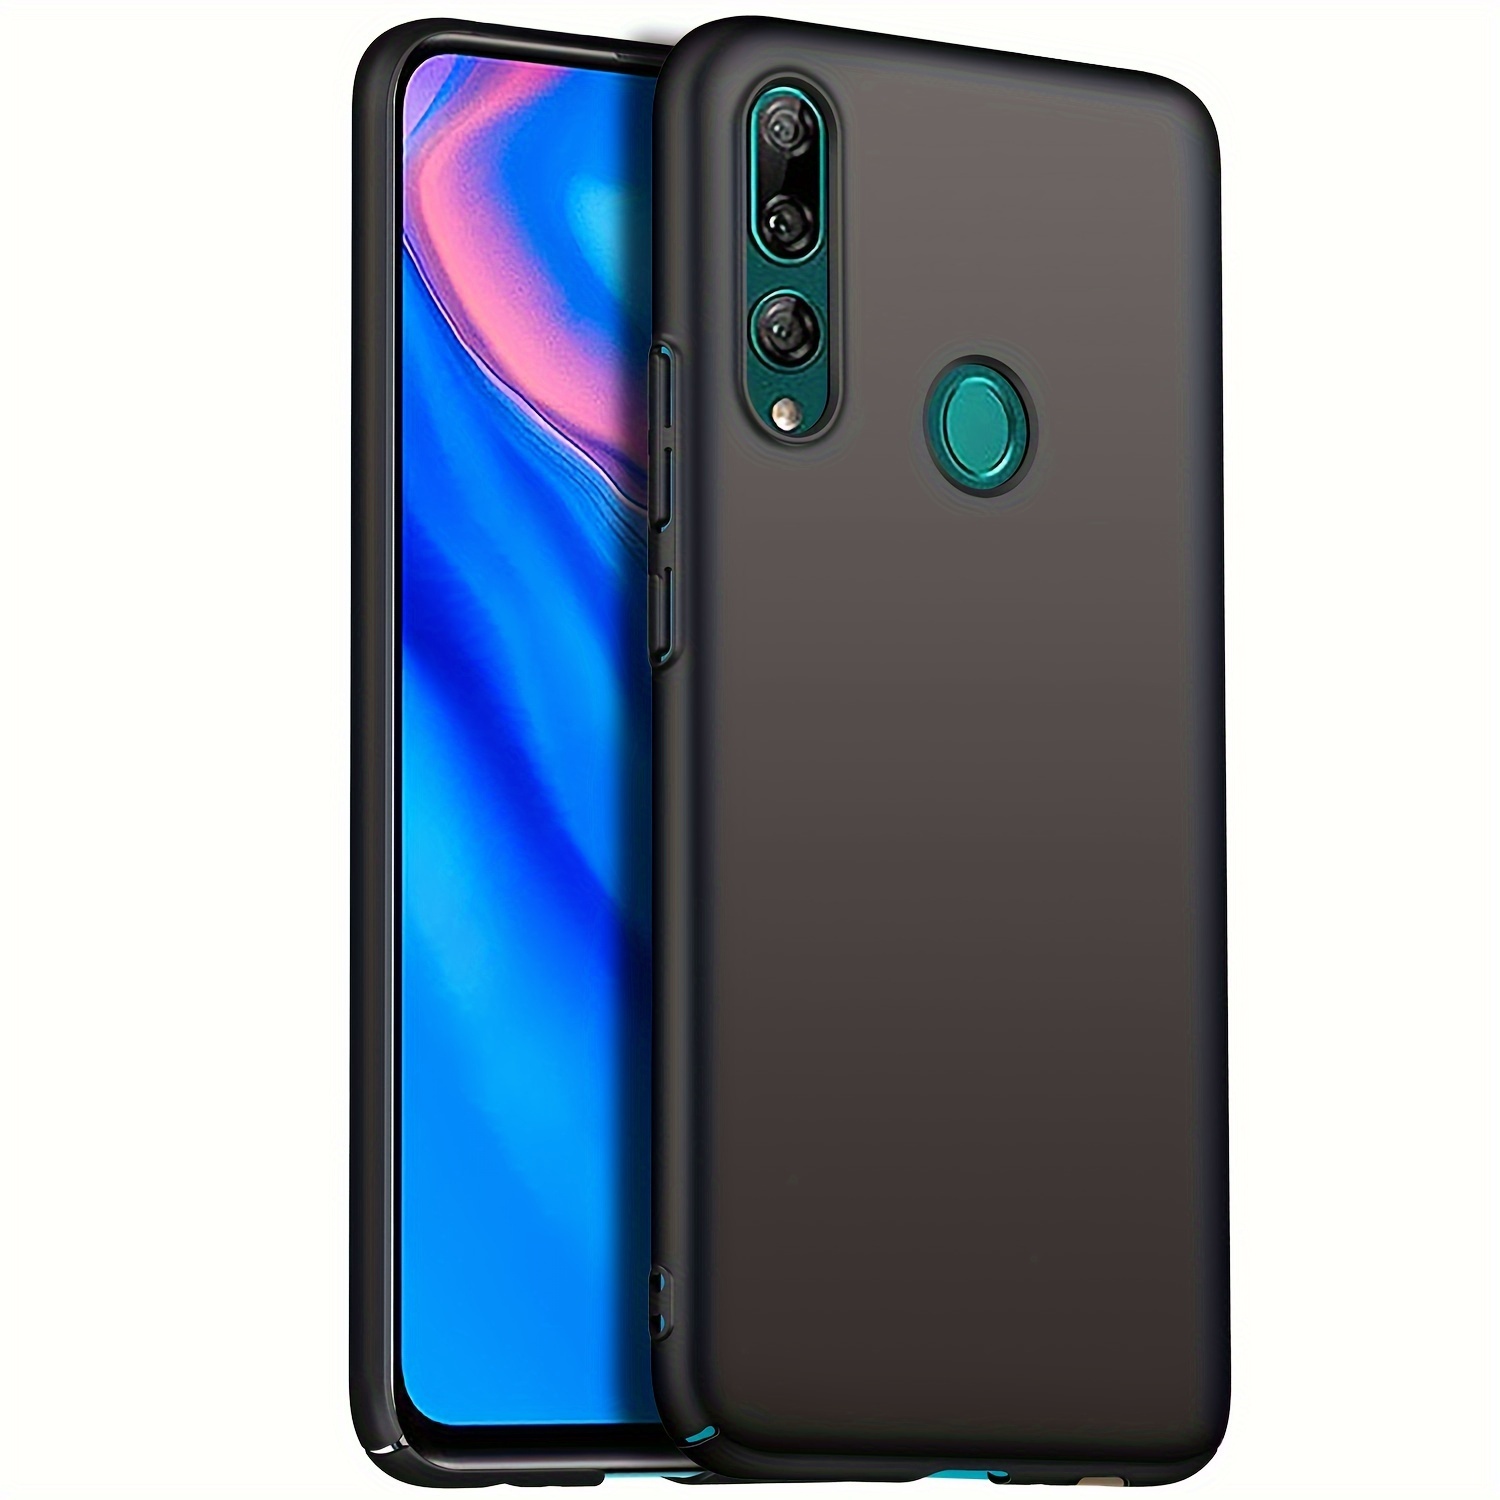 Non-Slip Airbag Case For Mate 20 20Pro Mate20 X EVR-L29 Soft Silicone Phone  Back Cover For Huawei Mate20 Pro 20x 20 LYA-L09 HMA-L09 Ultrathin Housing